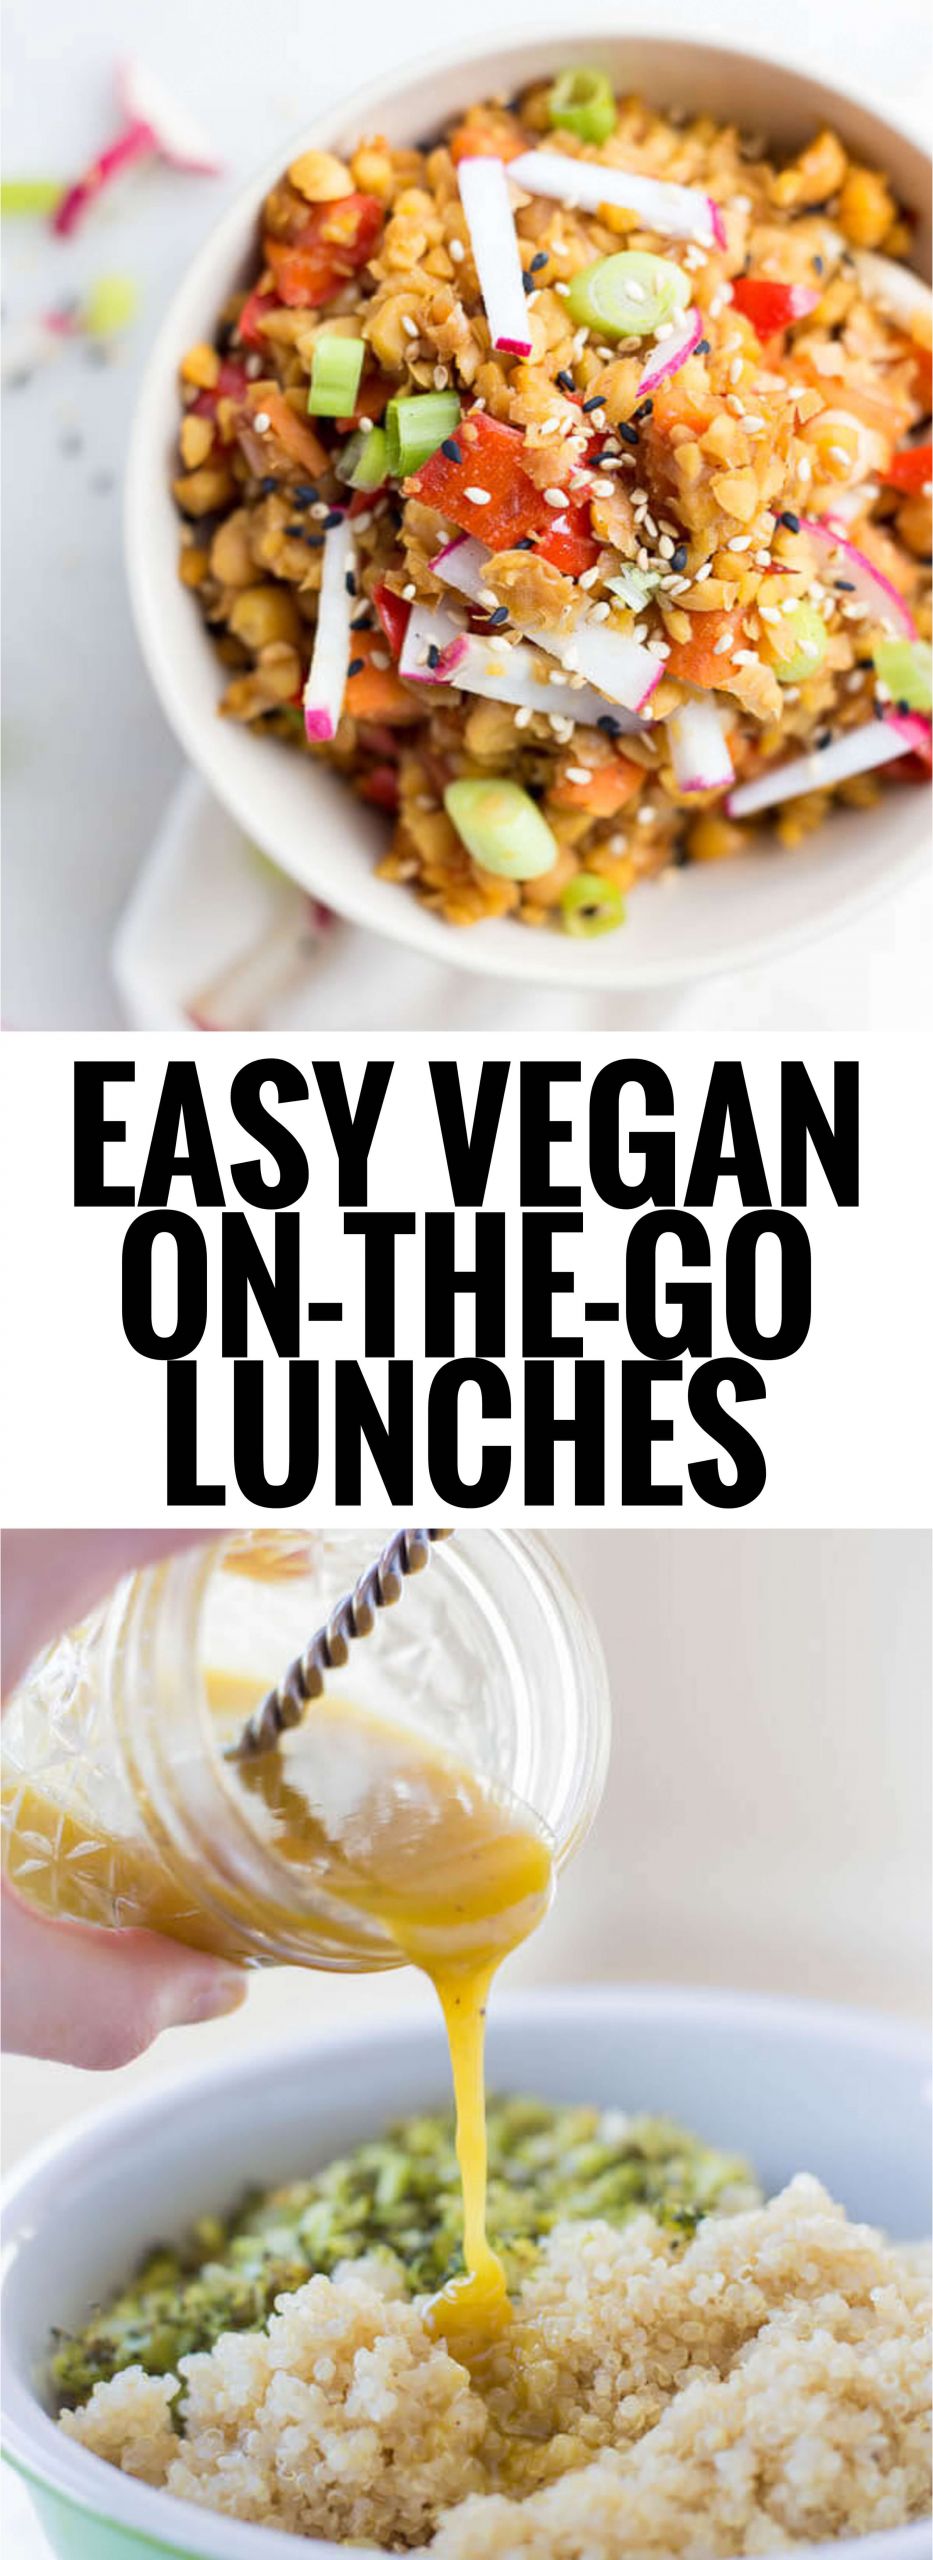 Healthy Vegan Lunches
 Easy Vegan the Go Lunches Fooduzzi